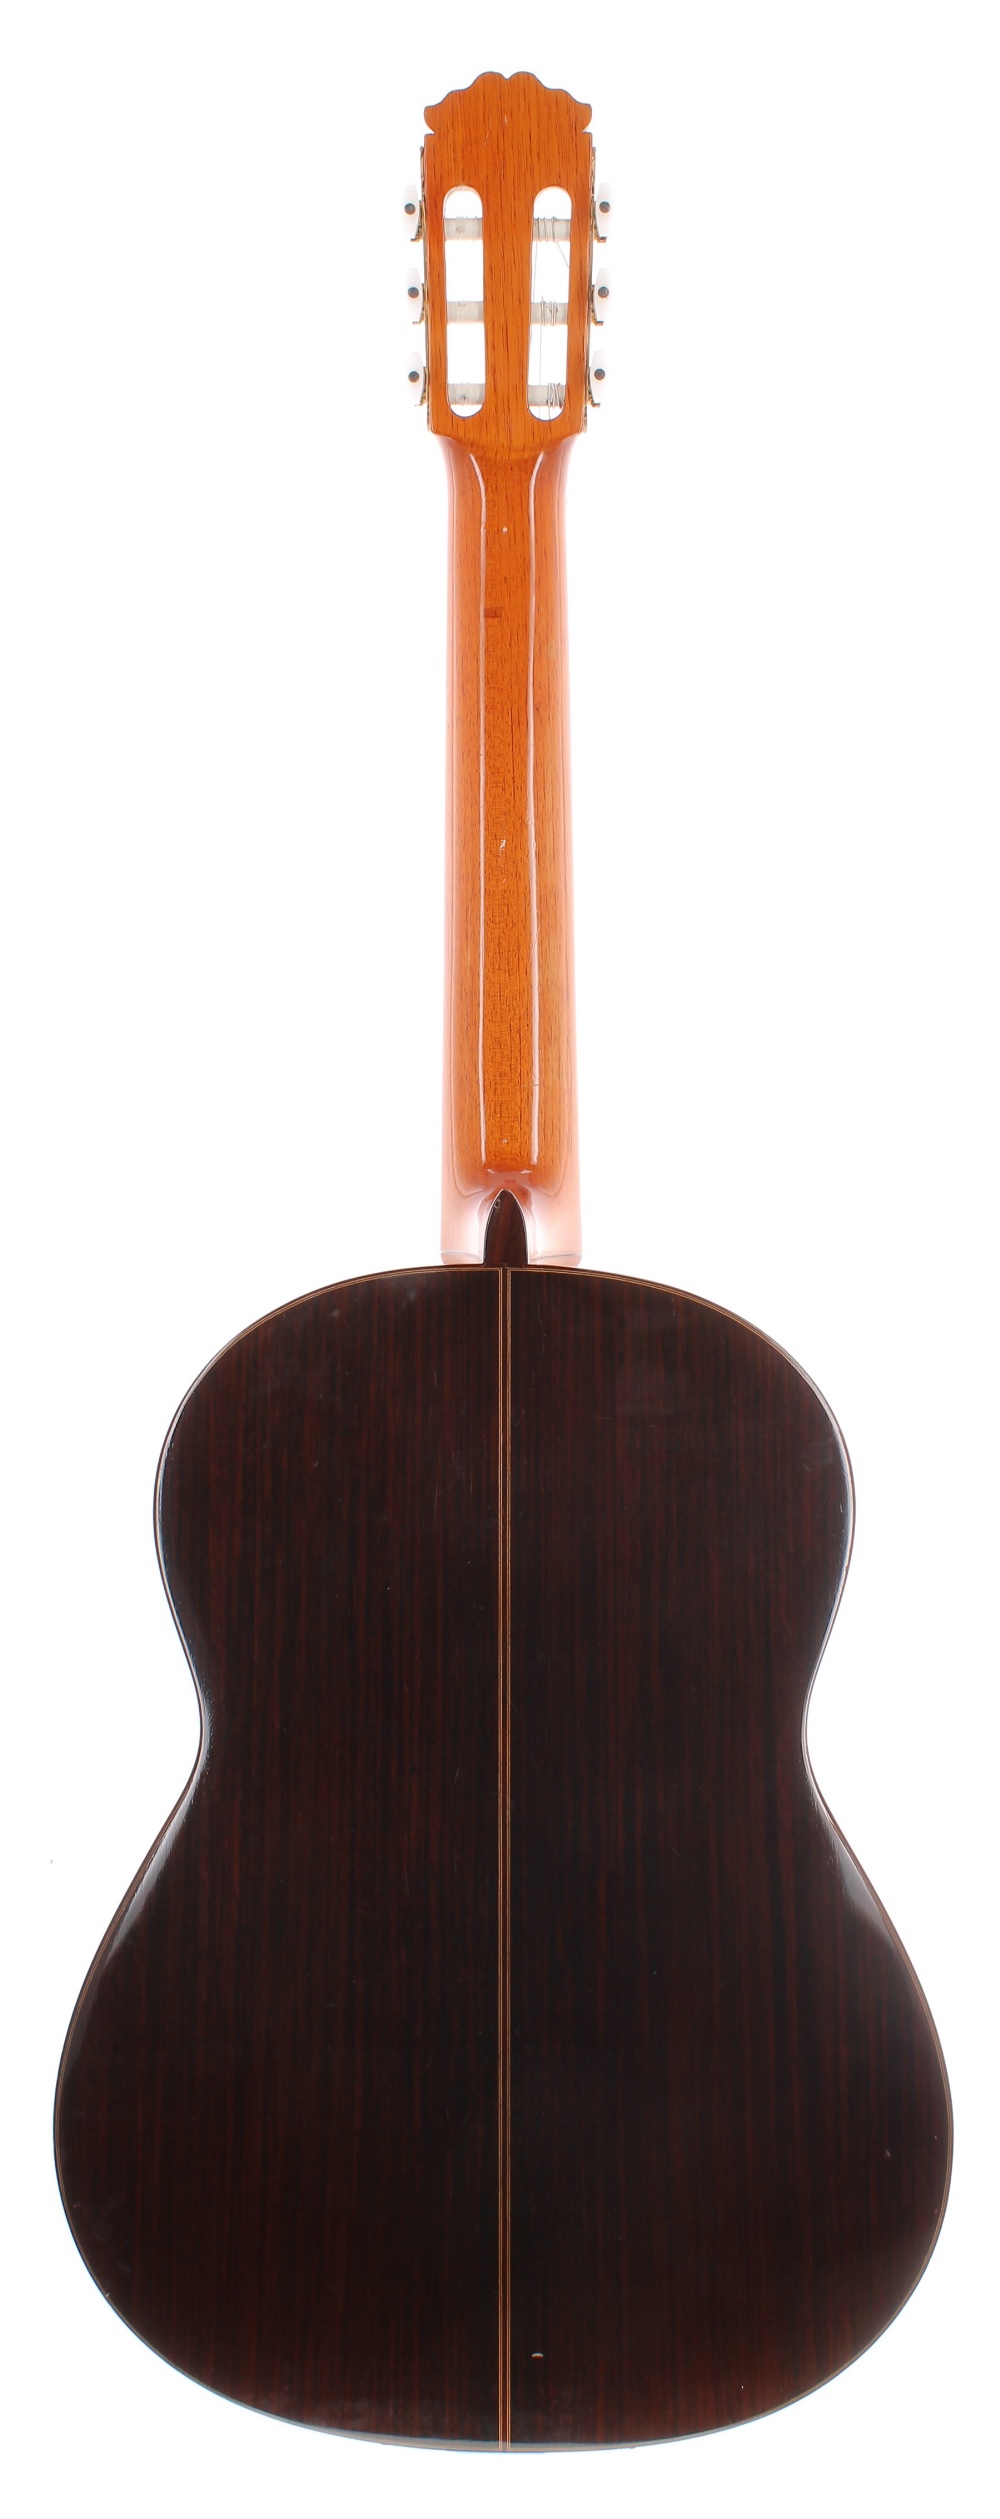 1979 Manuel Contreras C3 classical guitar, made in Spain; Back and sides: Indian rosewood, minor - Image 2 of 2